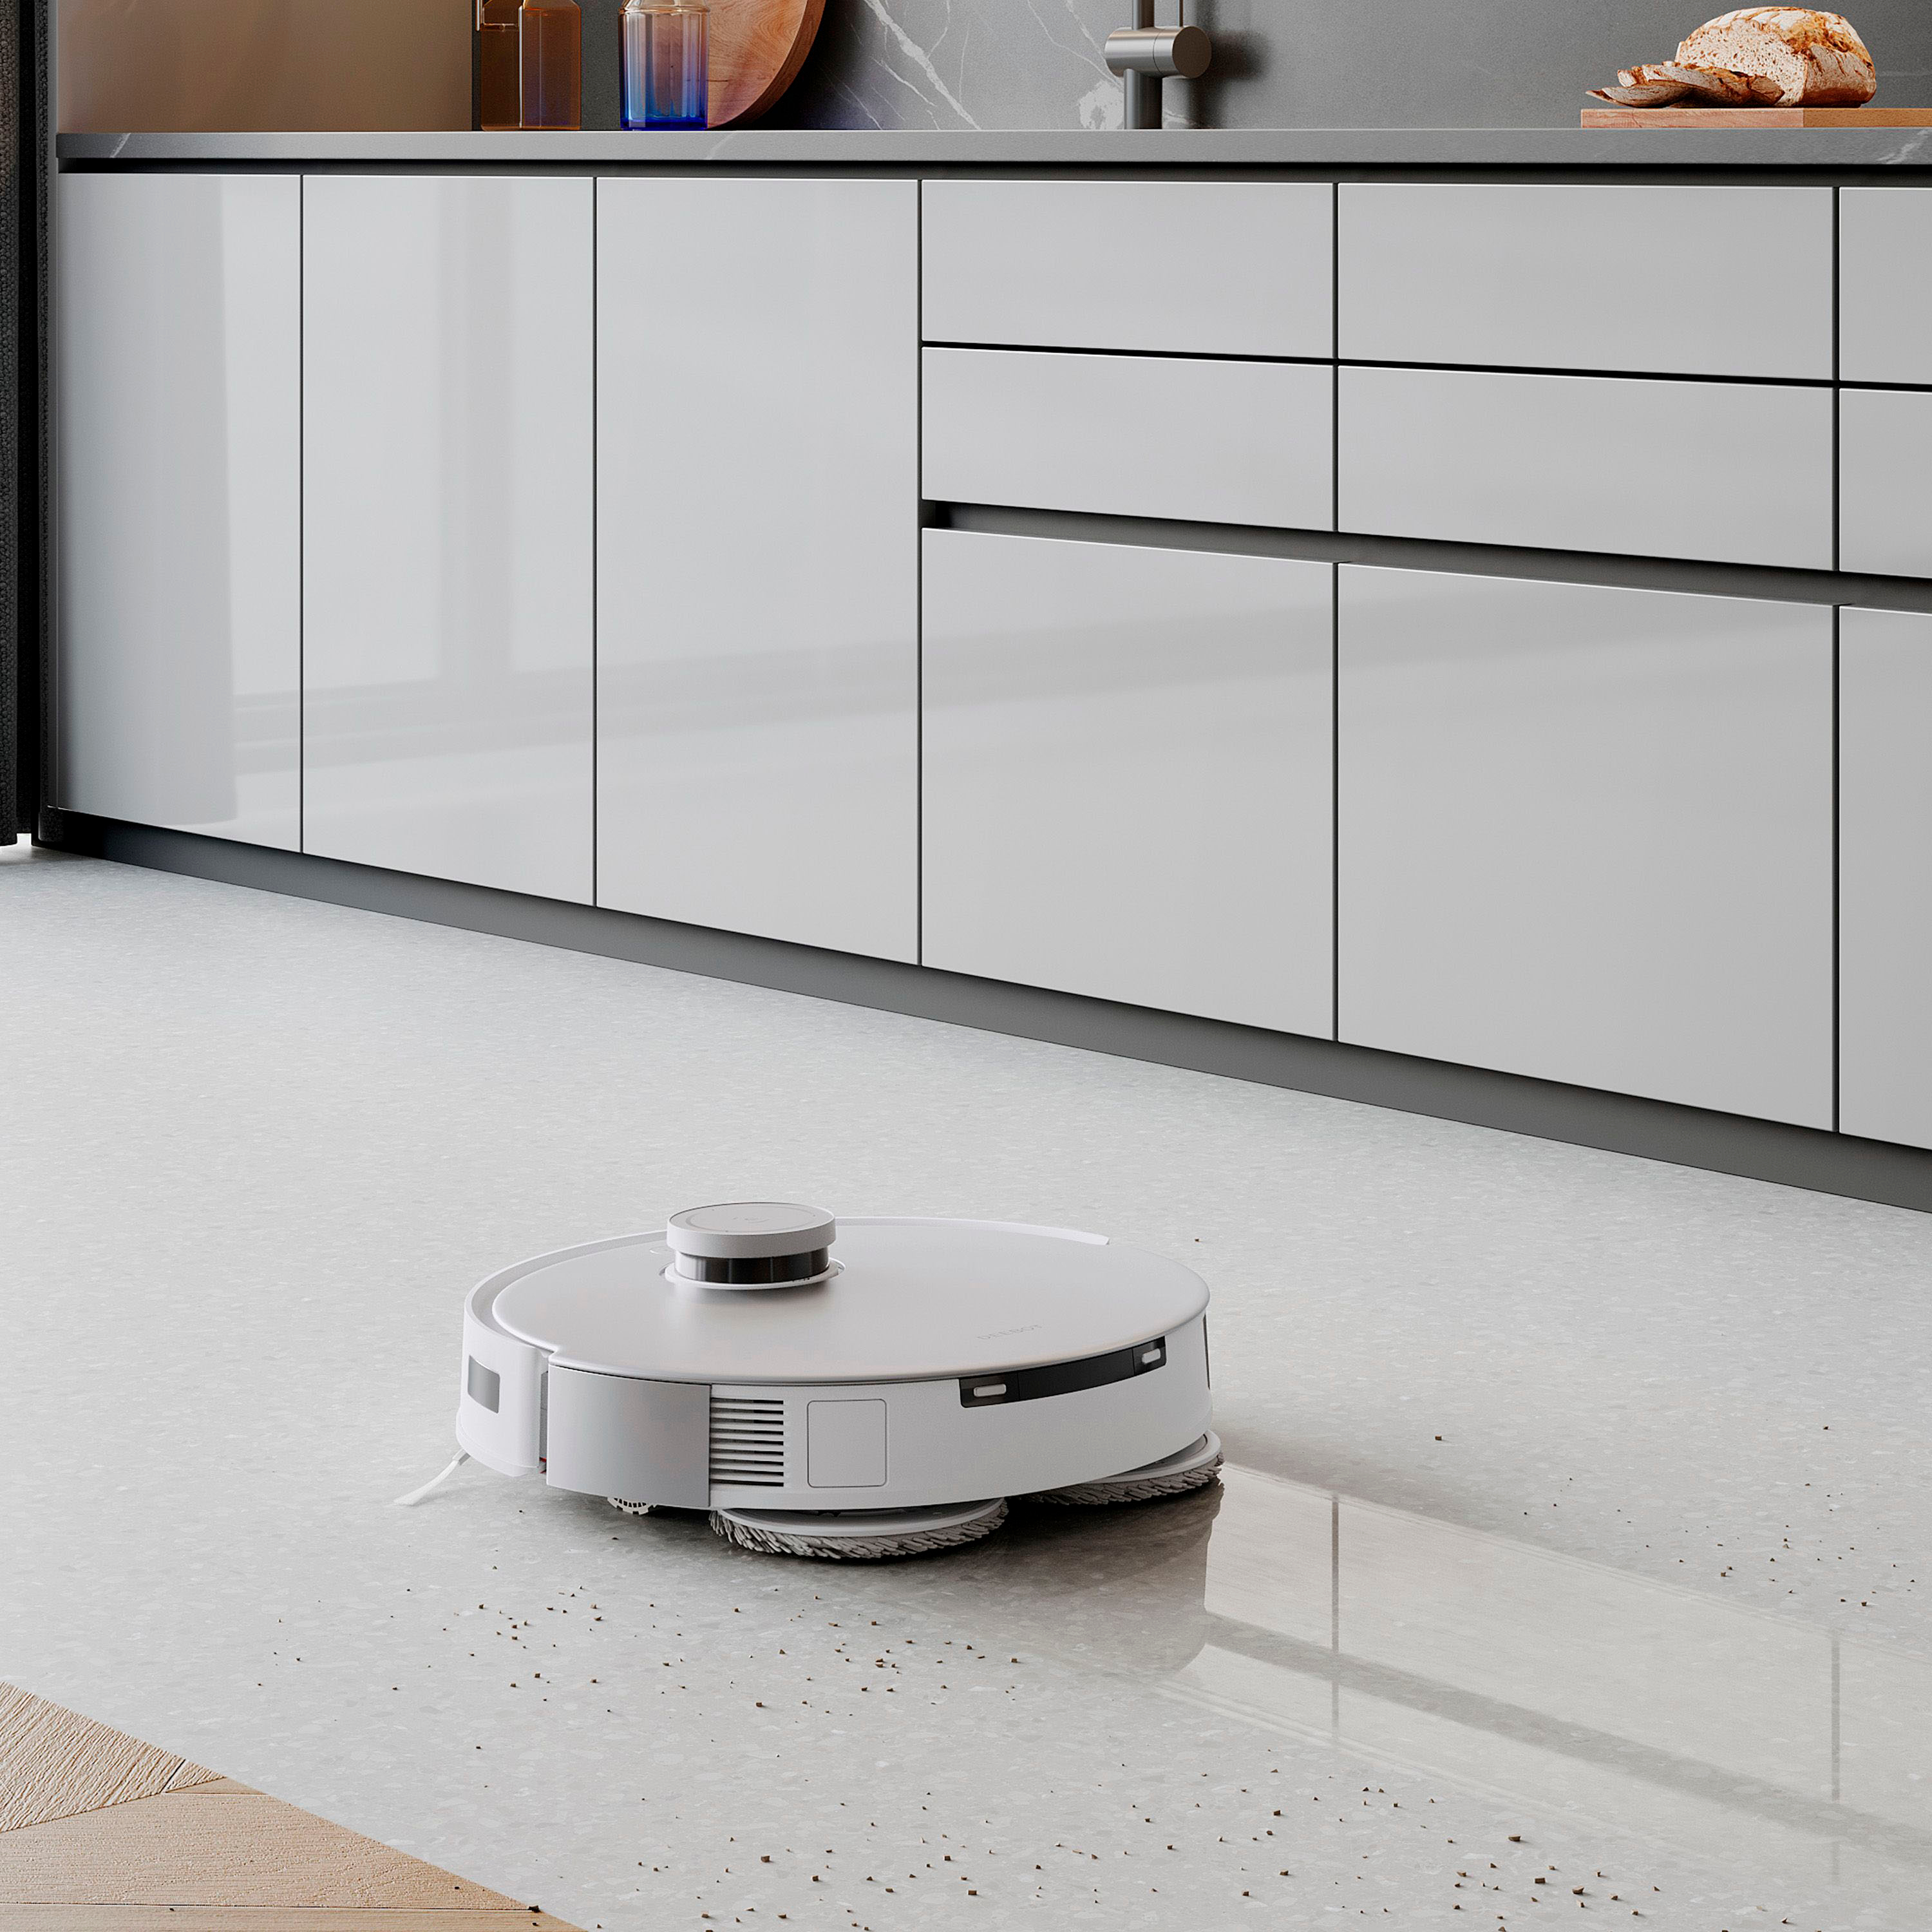 ECOVACS Raises The Bar In Home Cleaning Robotics With New DEEBOT T20 OMNI –  Eastern Suburbs Mums